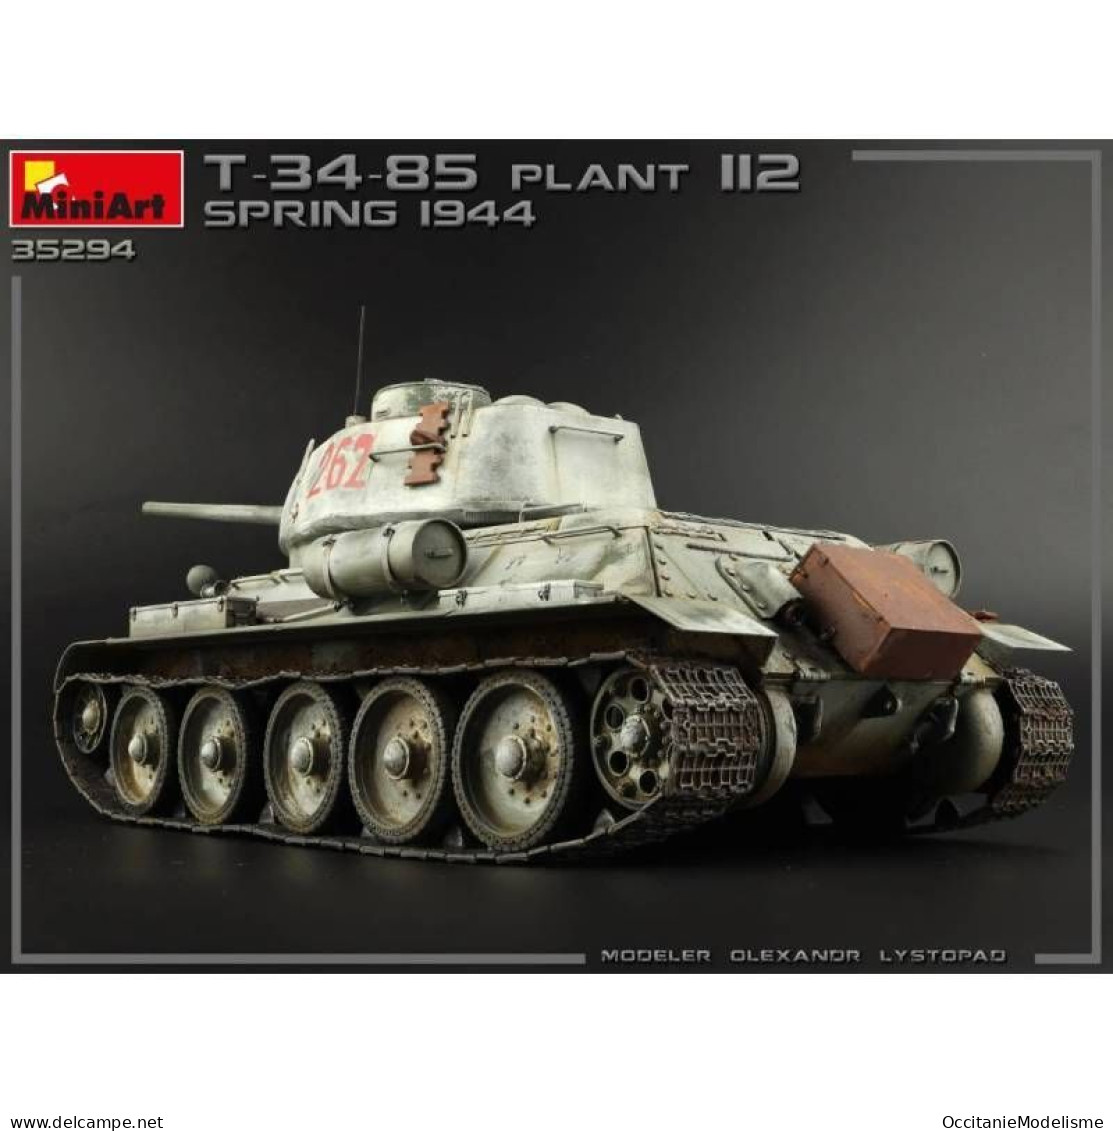 Miniart - CHAR T-34/85 Plant 112 Spring 1944 Maquette Réf. 35294 Neuf NBO 1/35 - Véhicules Militaires